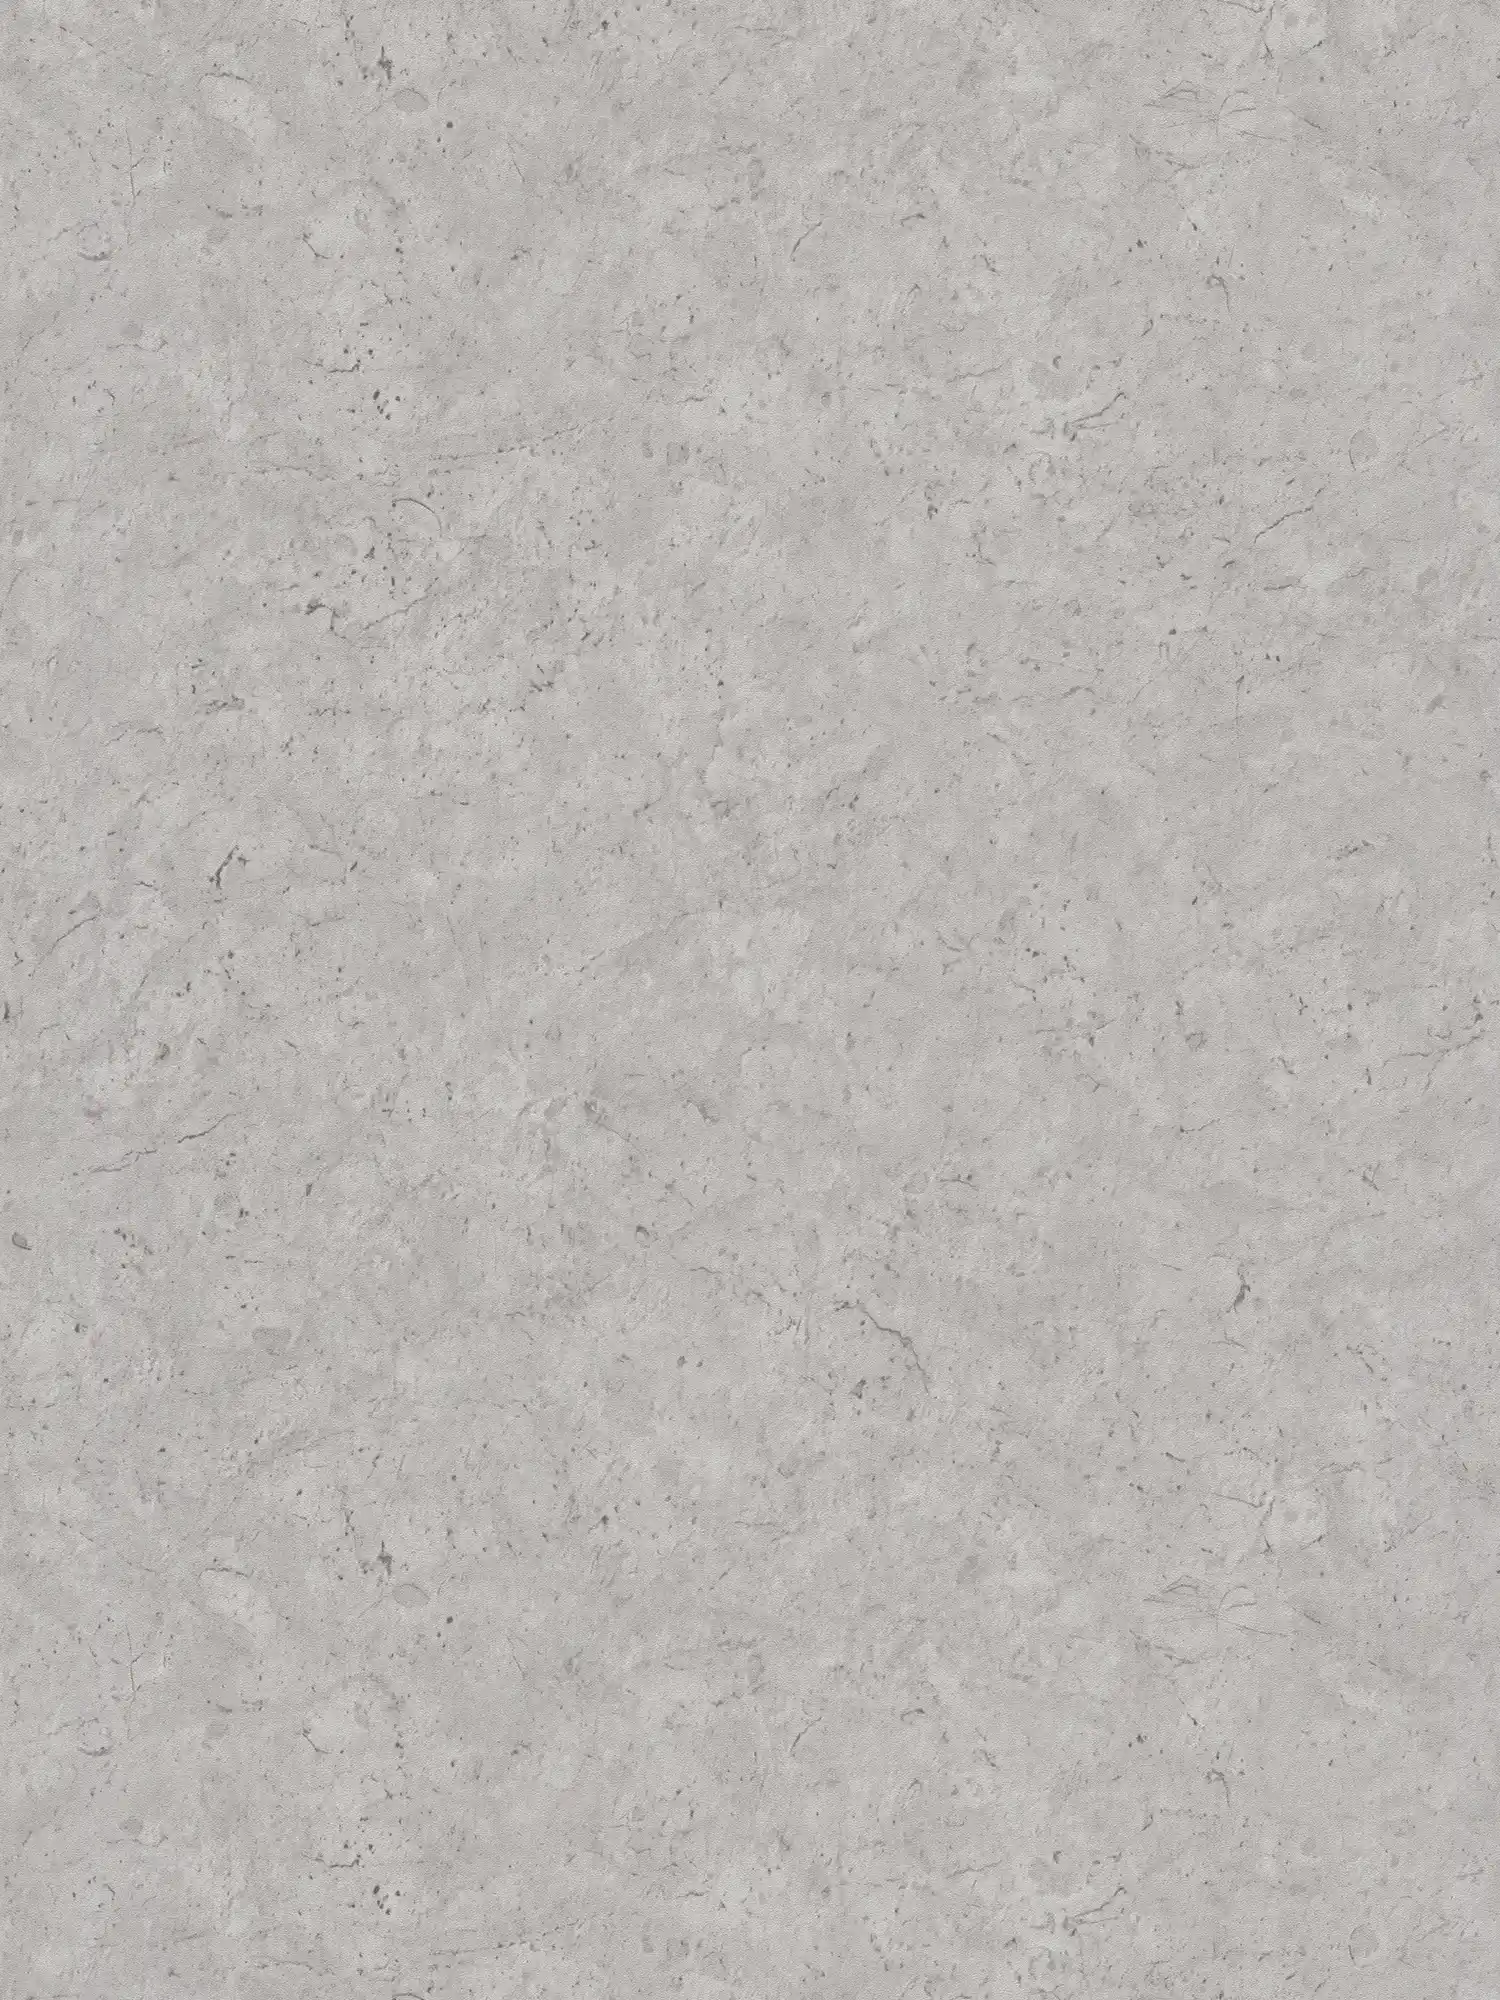 Concrete look wallpaper with subtle pattern - grey
